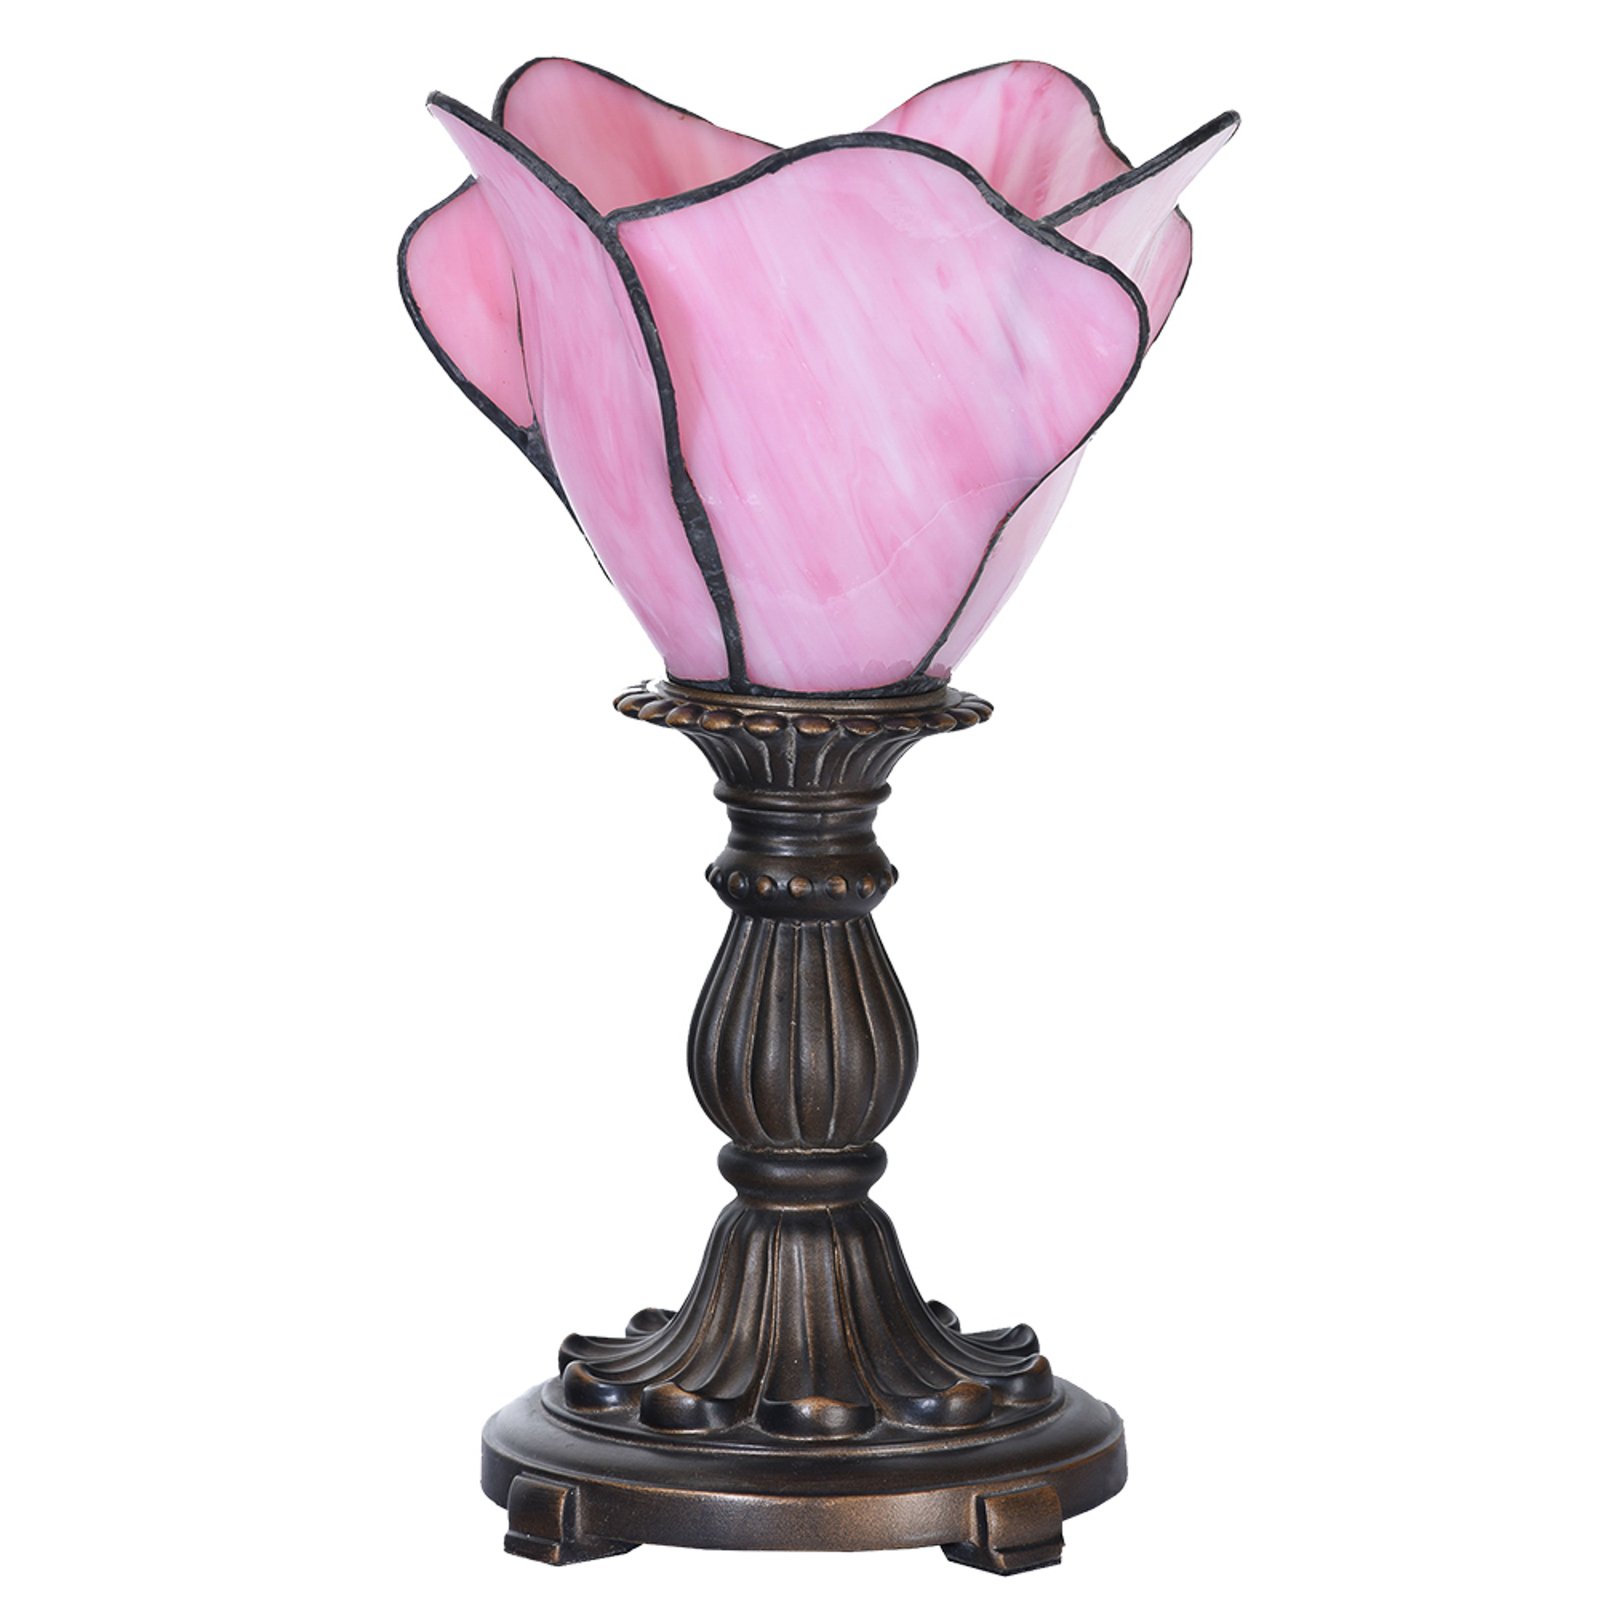 5LL-6099 table lamp in pink, Tiffany style